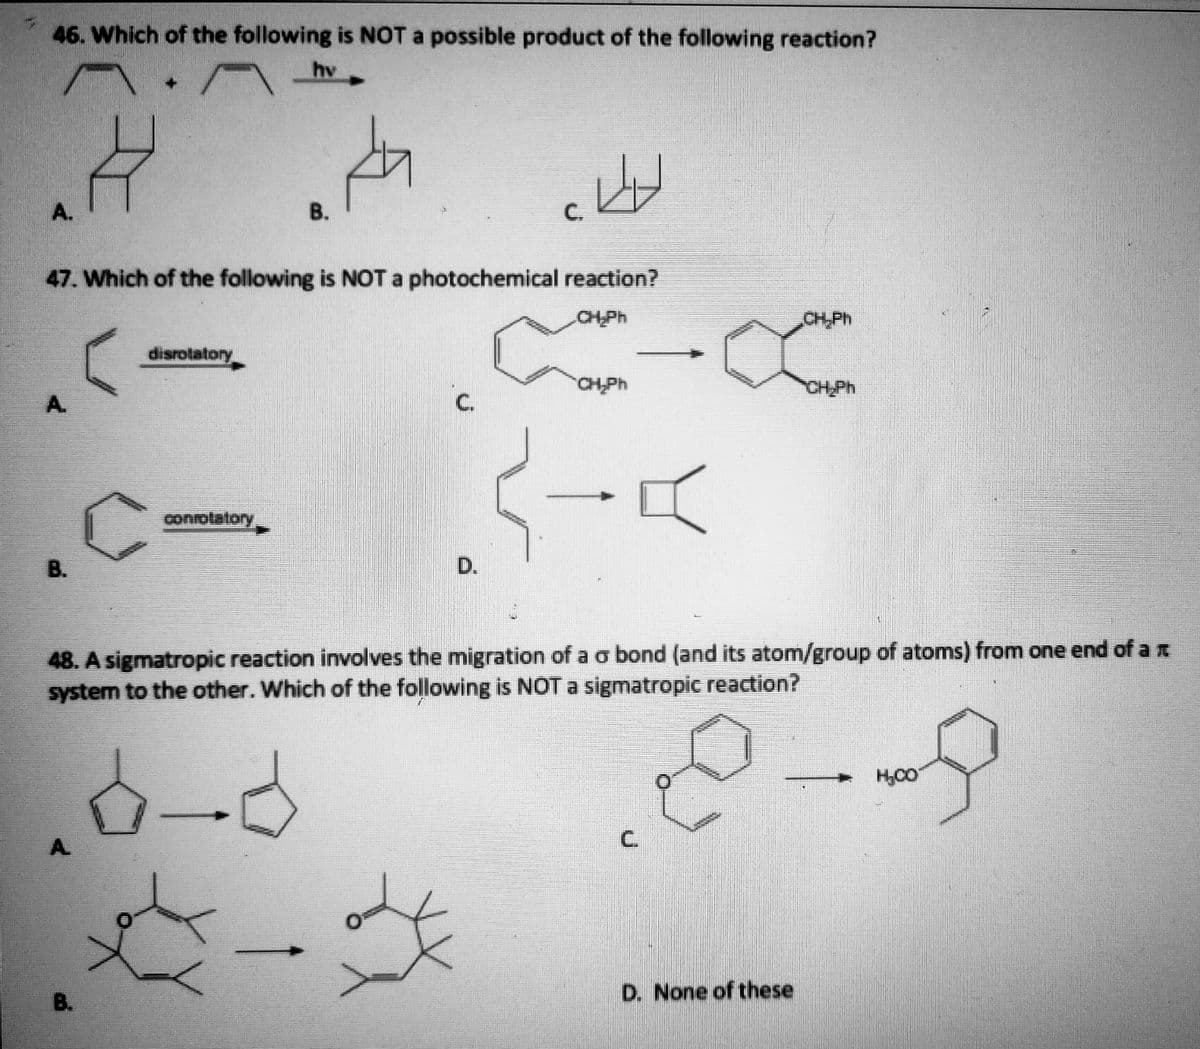 46. Which of the following is NOT a possible product of the following reaction?
hv
A.
В.
C.
47. Which of the following is NOT a photochemical reaction?
CH-Ph
CH,Ph
disrotatory
CH.Ph
CHPH
A.
C.
conrolalory
B.
48. A sigmatropic reaction involves the migration of a o bond (and its atom/group of atoms) from one end of a E
system to the other. Which of the following is NOT a sigmatropic reaction?
A.
B.
D. None of these
C.
D.
